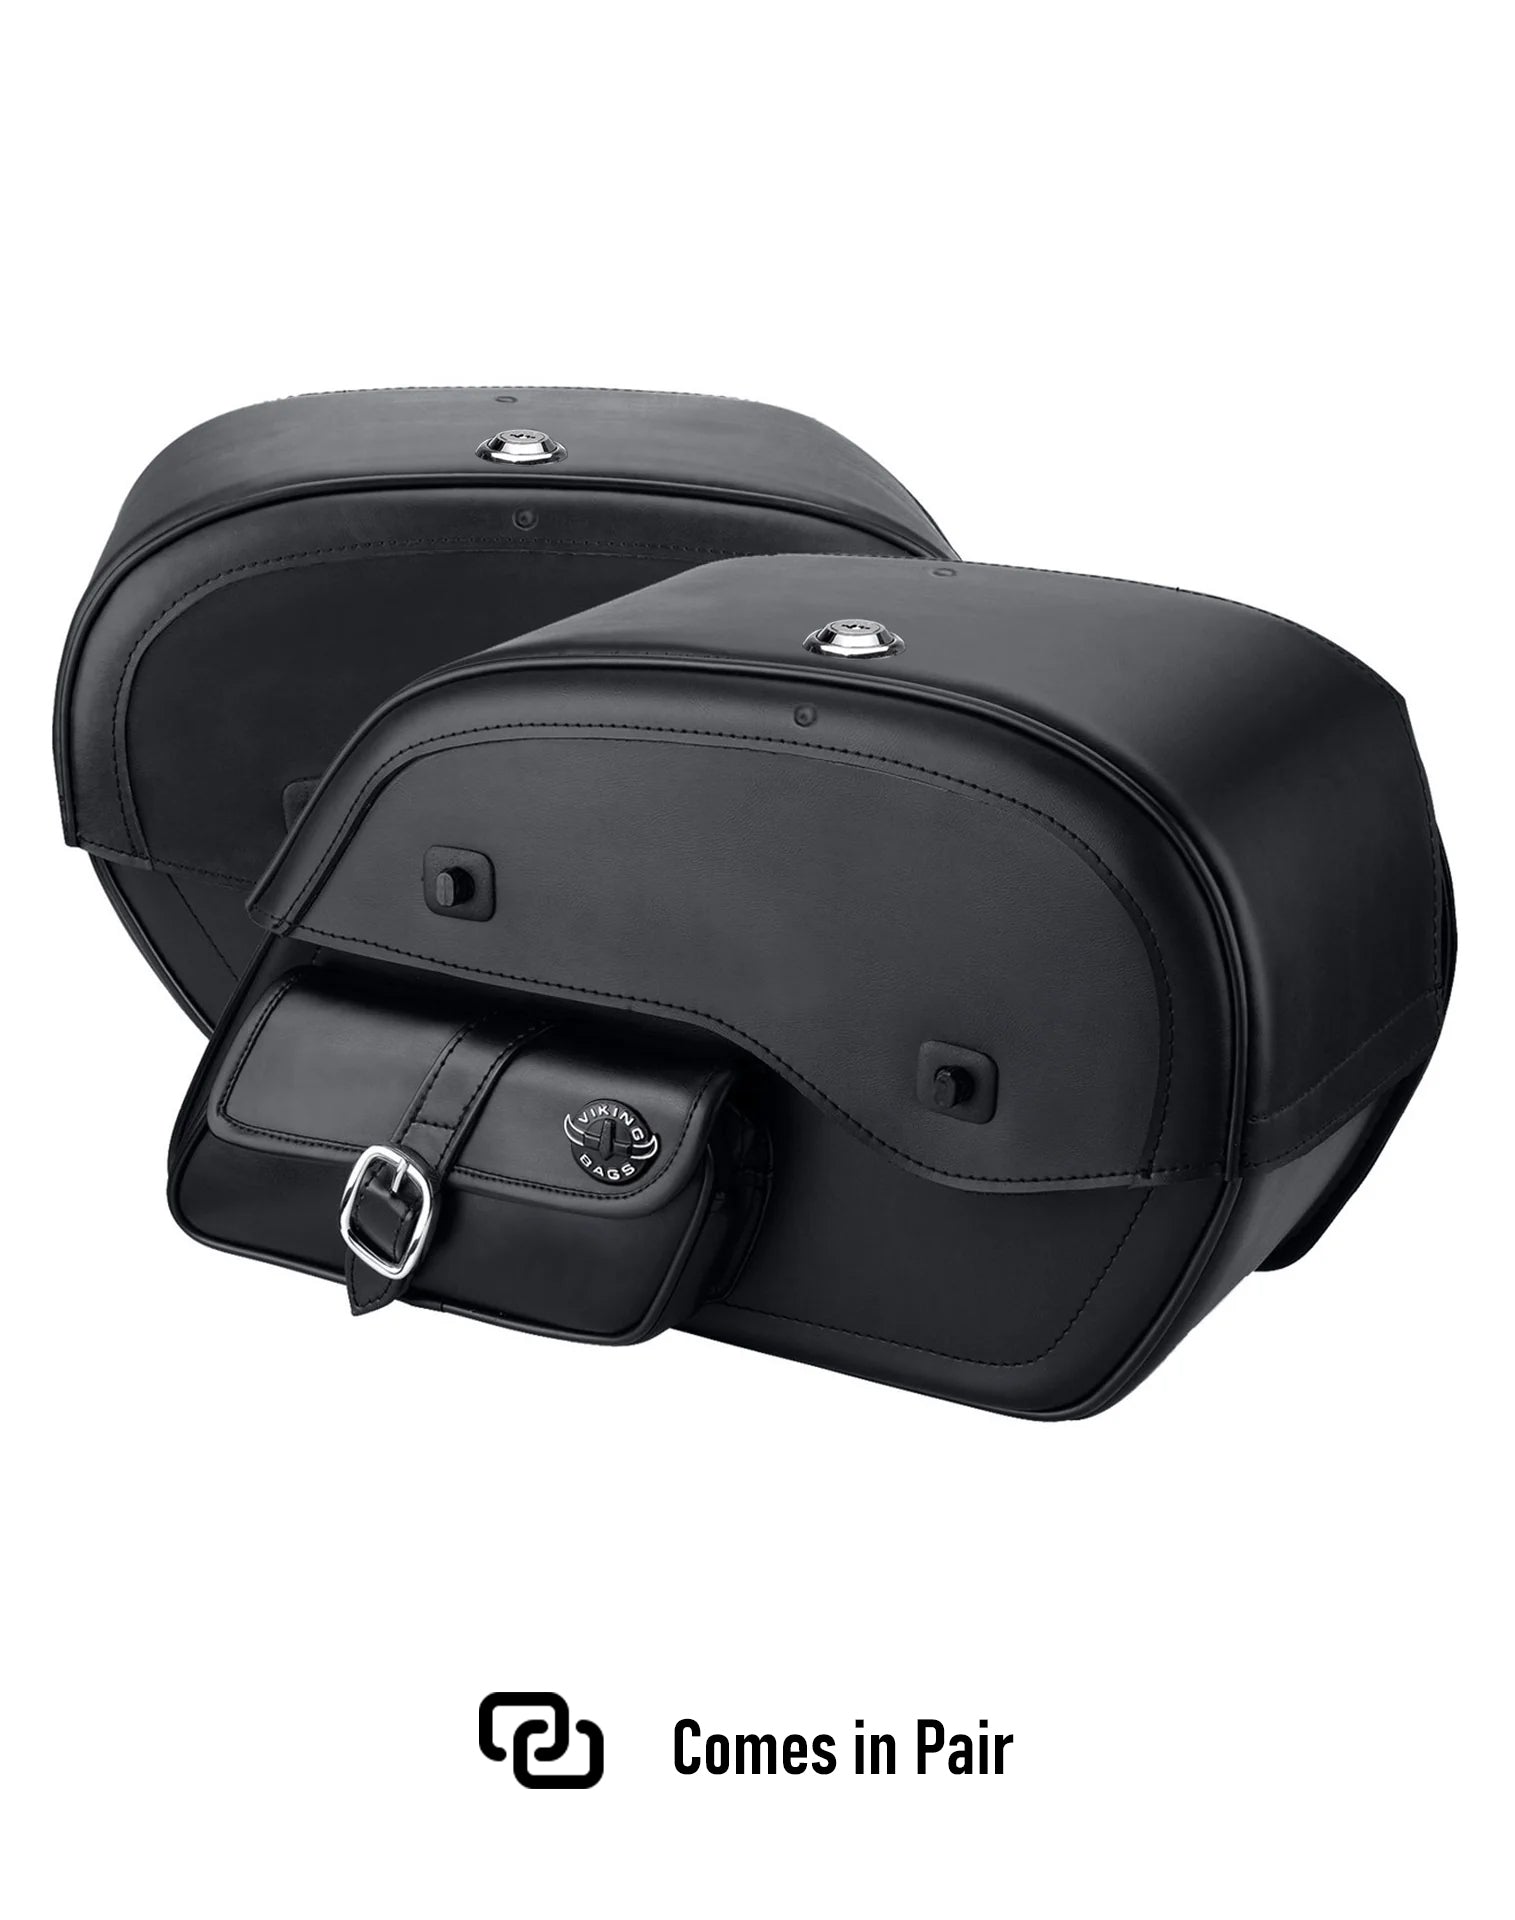 Viking Essential Side Pocket Large Suzuki Intruder 1500 Vl1500 Leather Motorcycle Saddlebags Weather Resistant Bags Comes in Pair